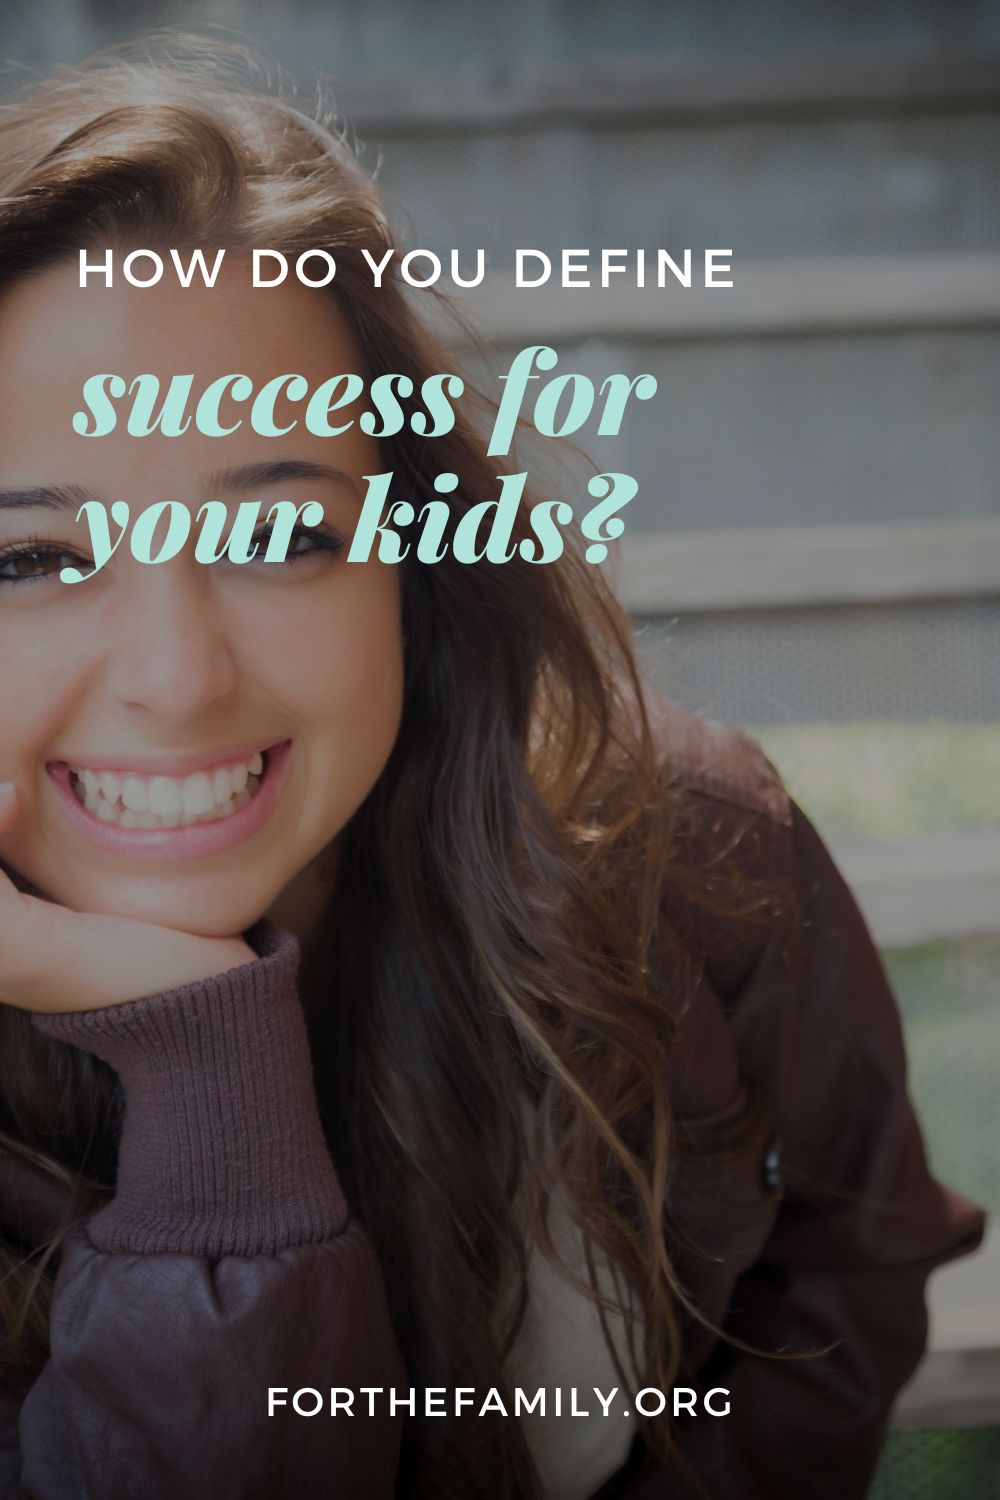 How Do You Define Success for Your Kids?